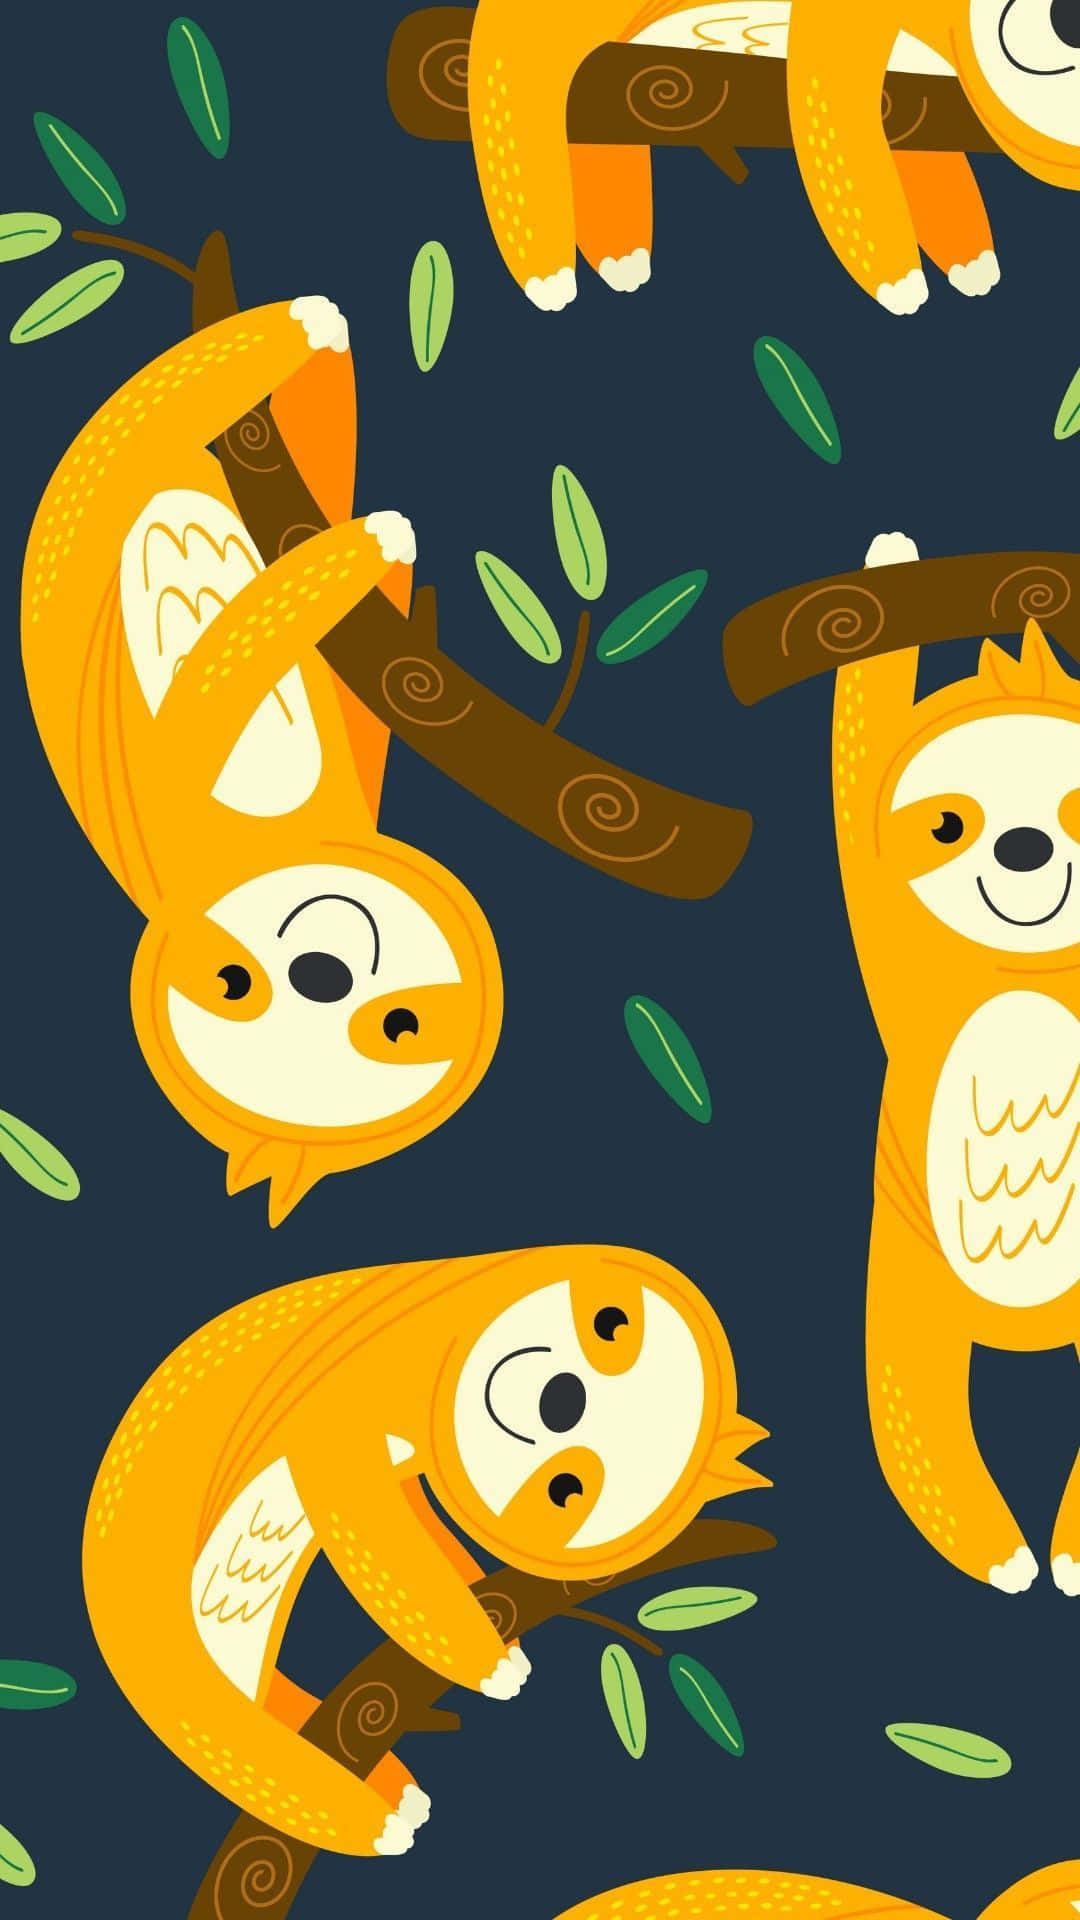 Cute Kawaii Sloth Chilling on a Branch Wallpaper